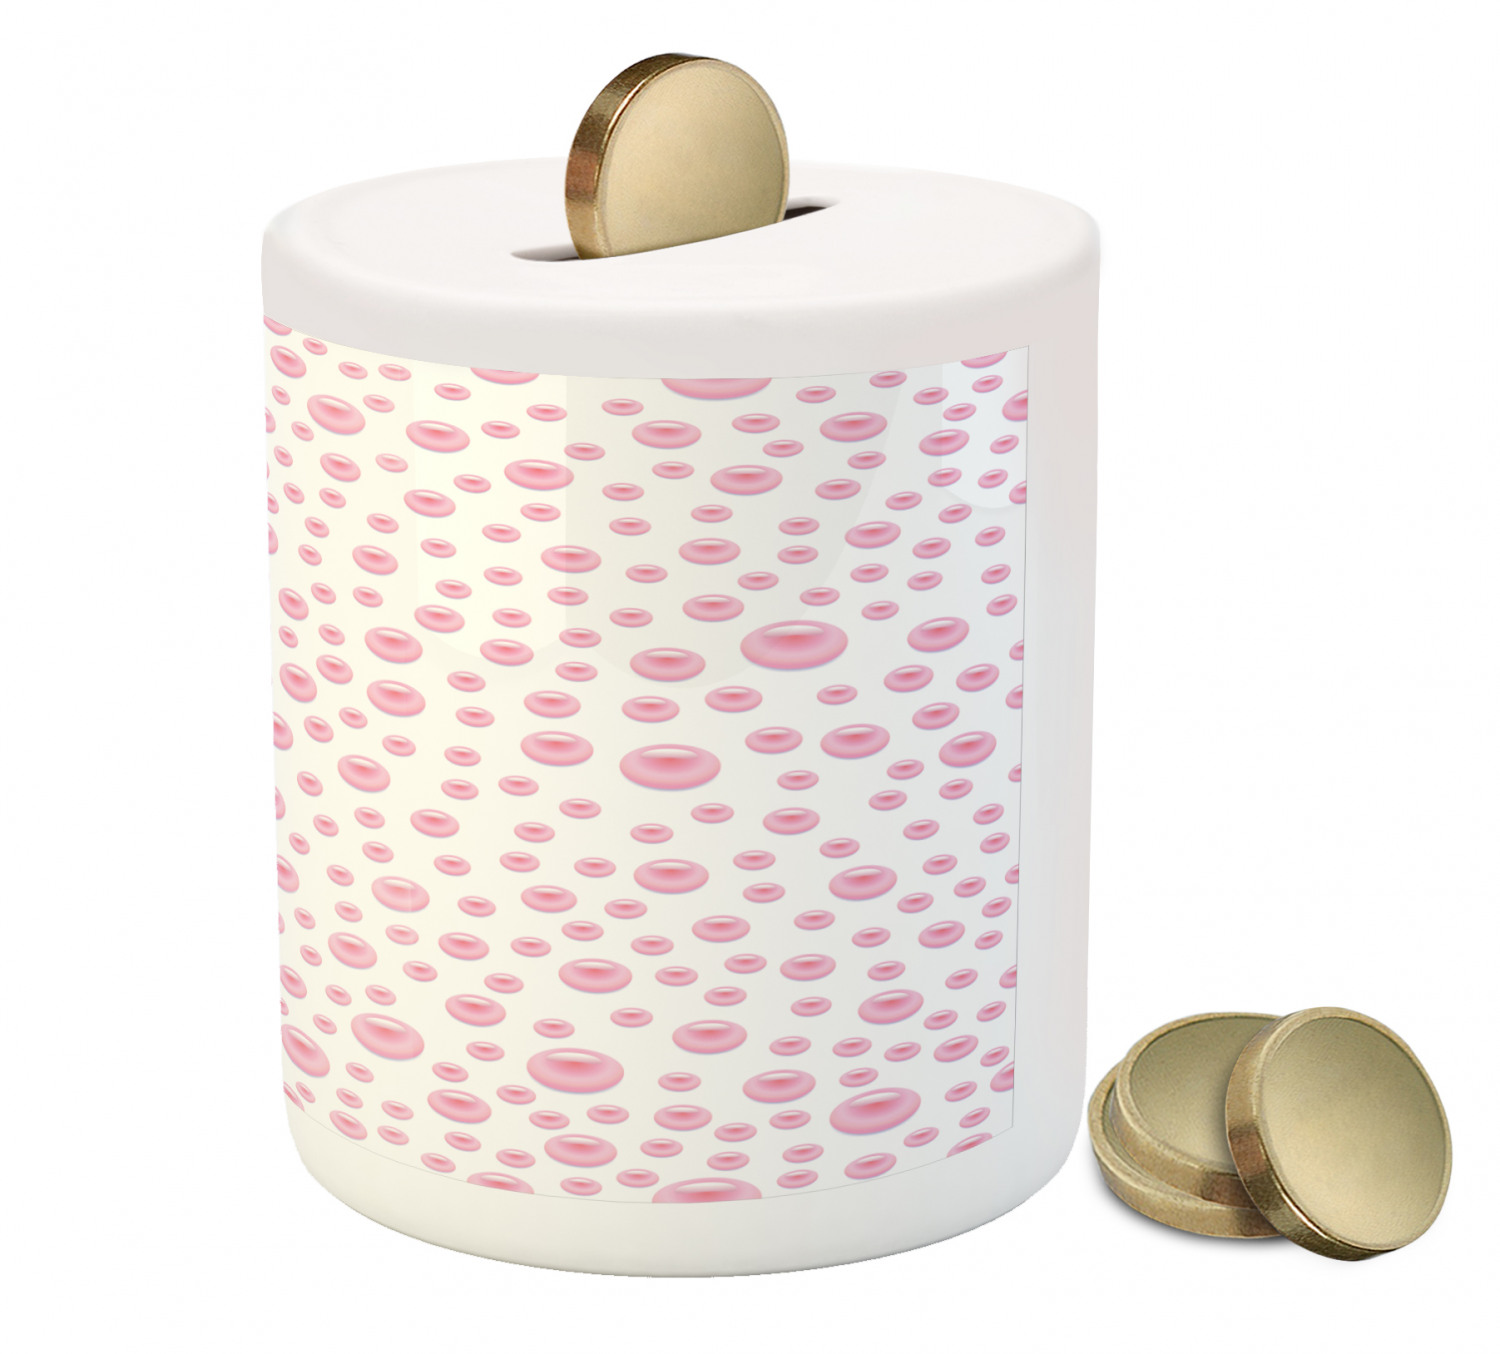 Pearls Piggy Bank, Pattern with Large Small Pink Color Pearls Precious Stones Bridal Print, Ceramic Coin Bank Money Box for Cash Saving, 3.6" X 3.2", White Pink, by Ambesonne - image 3 of 4